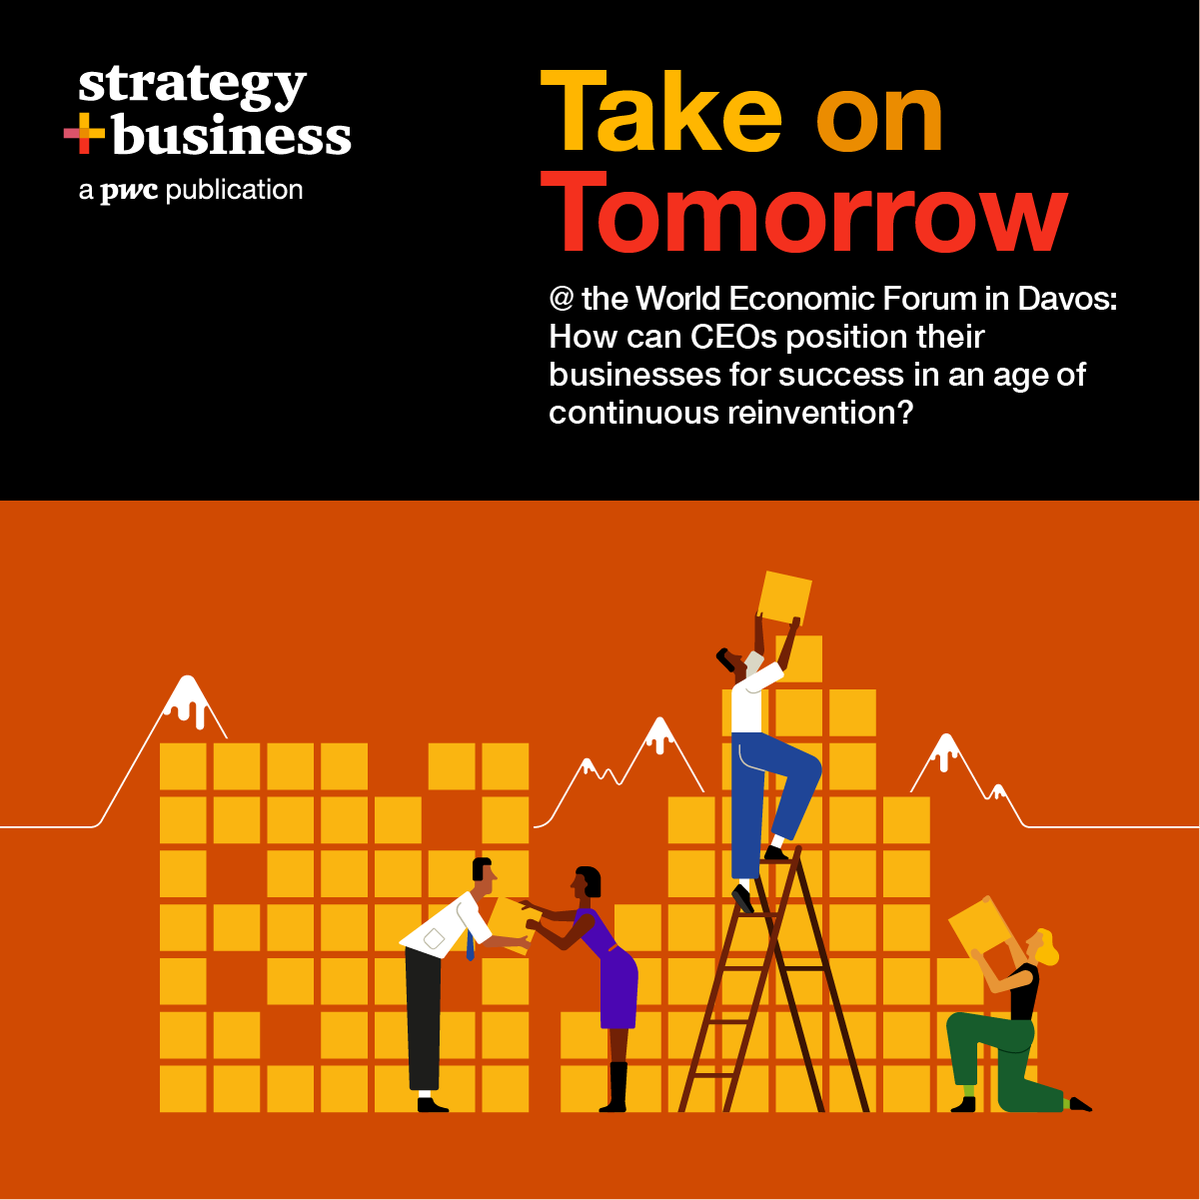 The latest episode of the #TakeOnTomorrow is here, featuring an in-depth discussion on @PwC's Global #CEOSurvey. Join us as we analyze perspectives of 4,700 CEOs, uncovering strategies for success in an ever-changing business environment. 

🎧Tune in now! pwc.to/3u64f5m